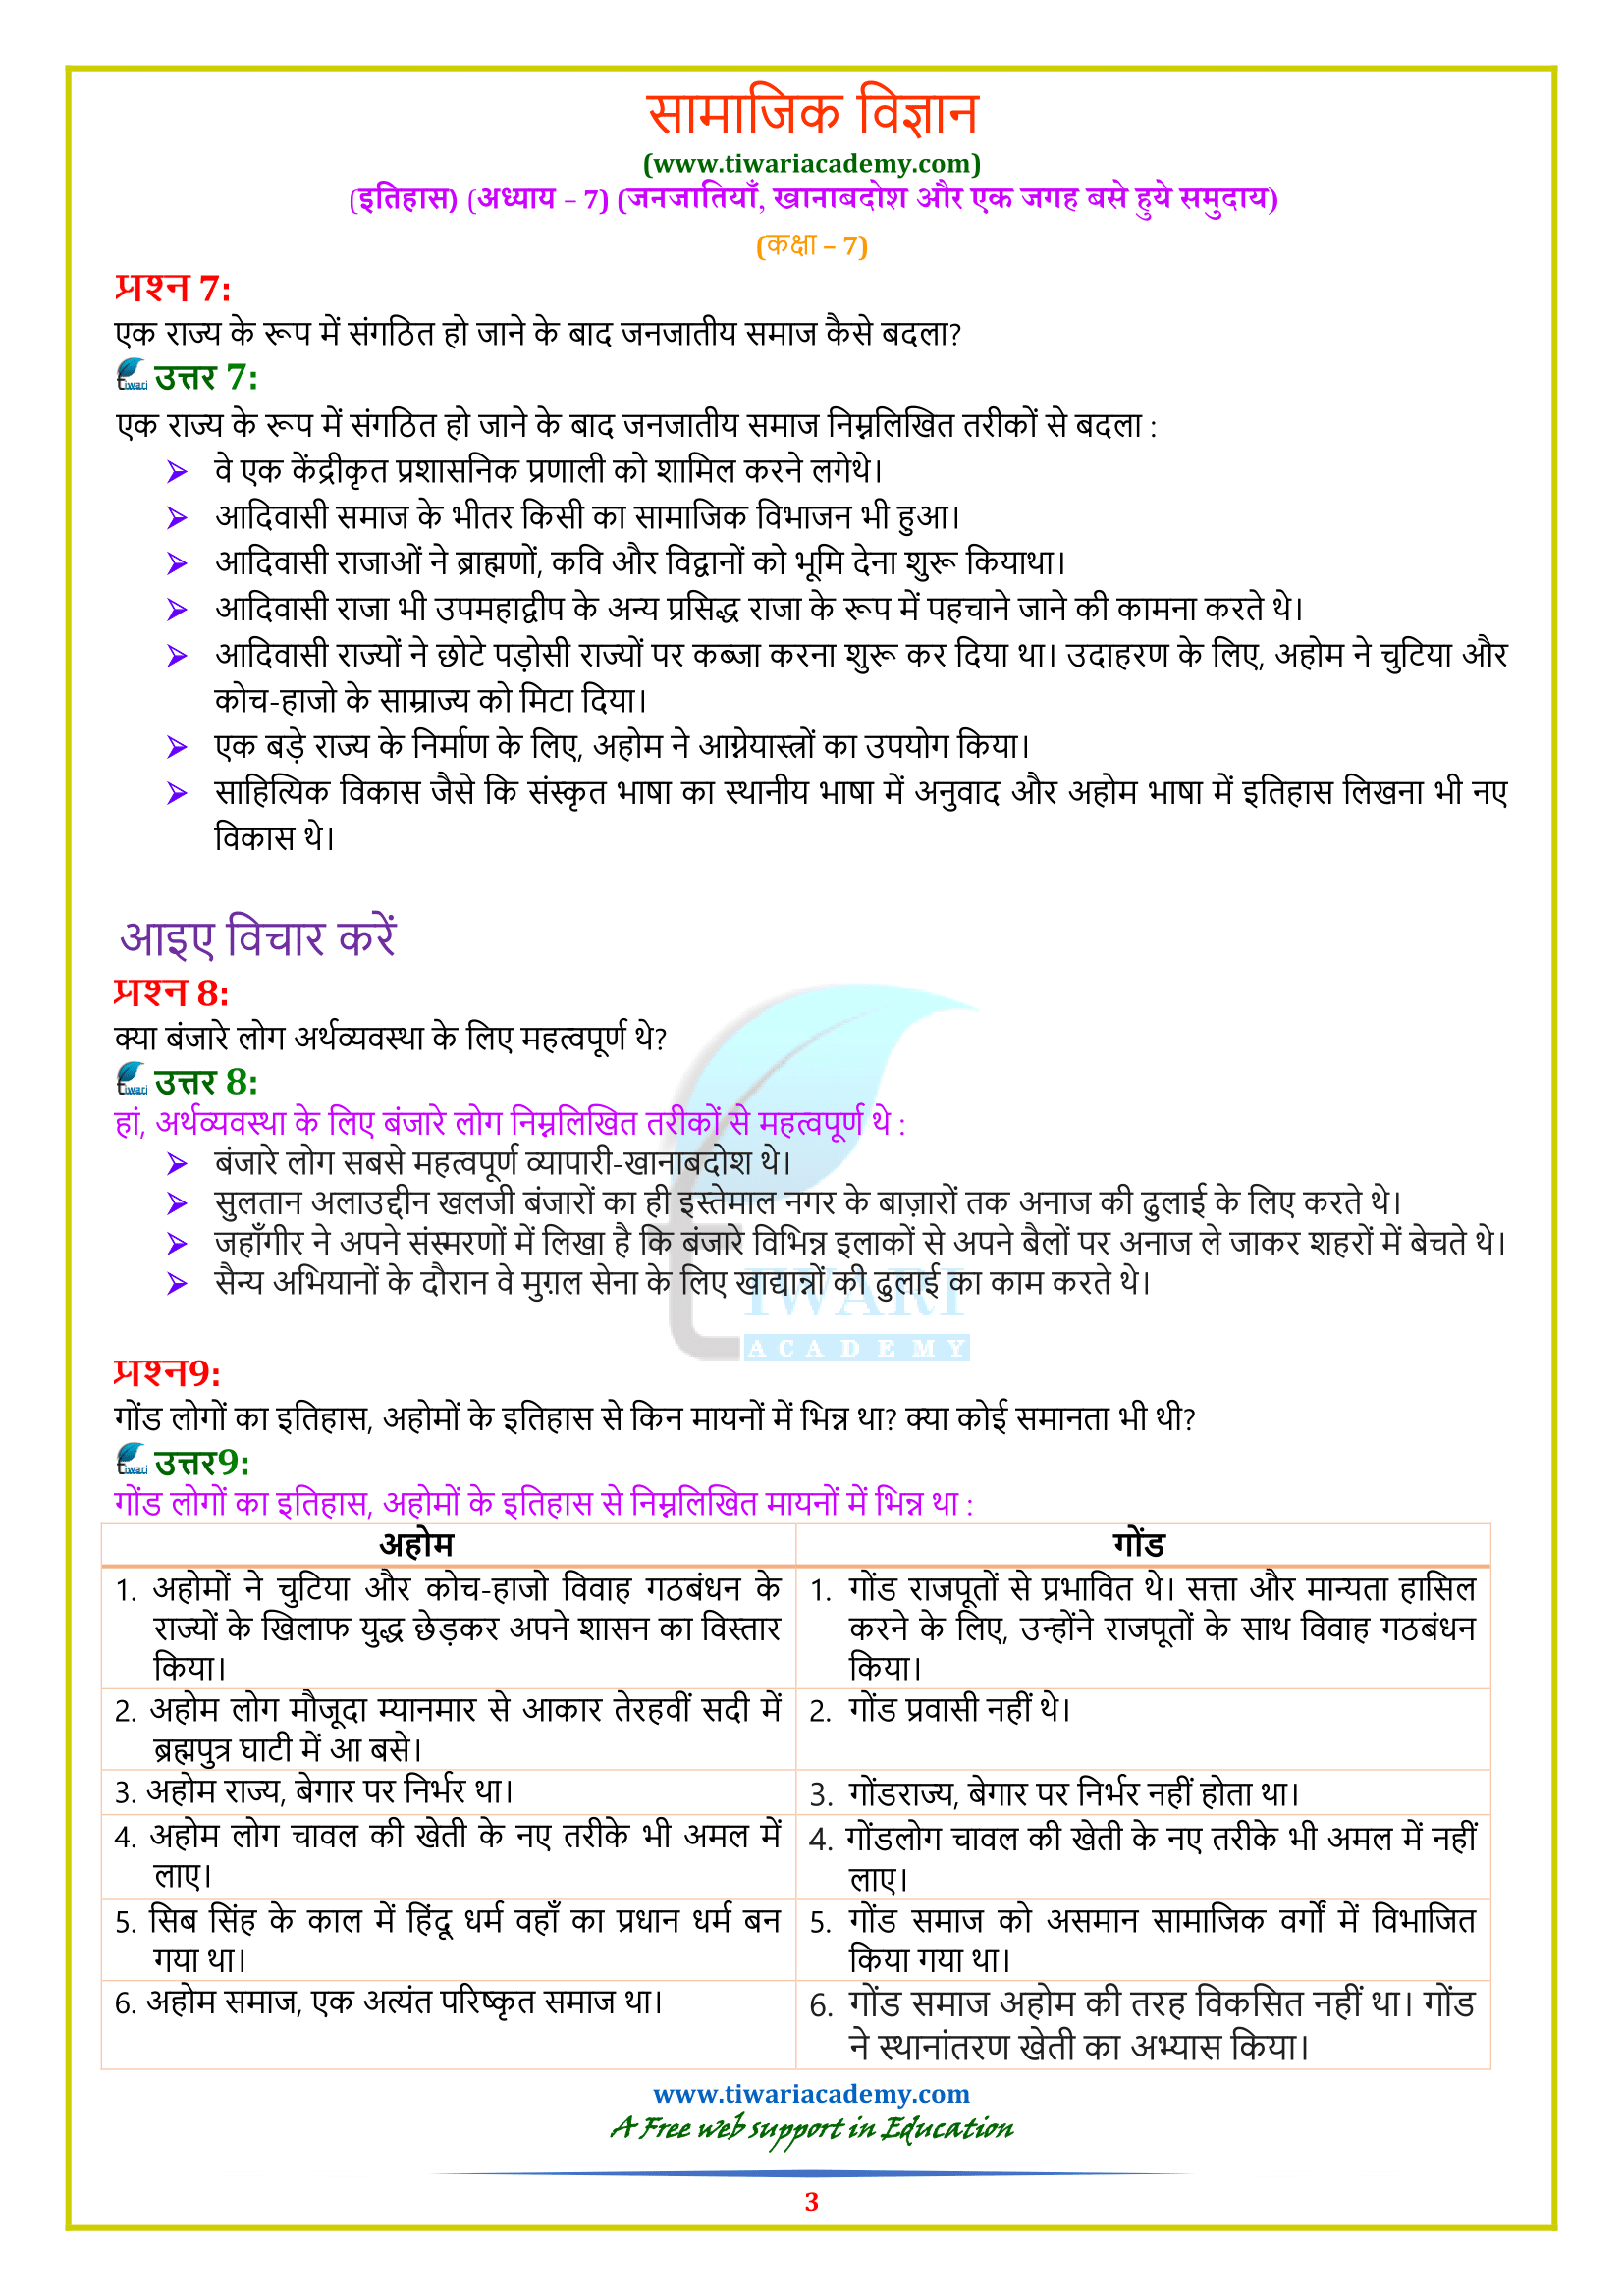 Class 7 History Chapter 7 in Hindi